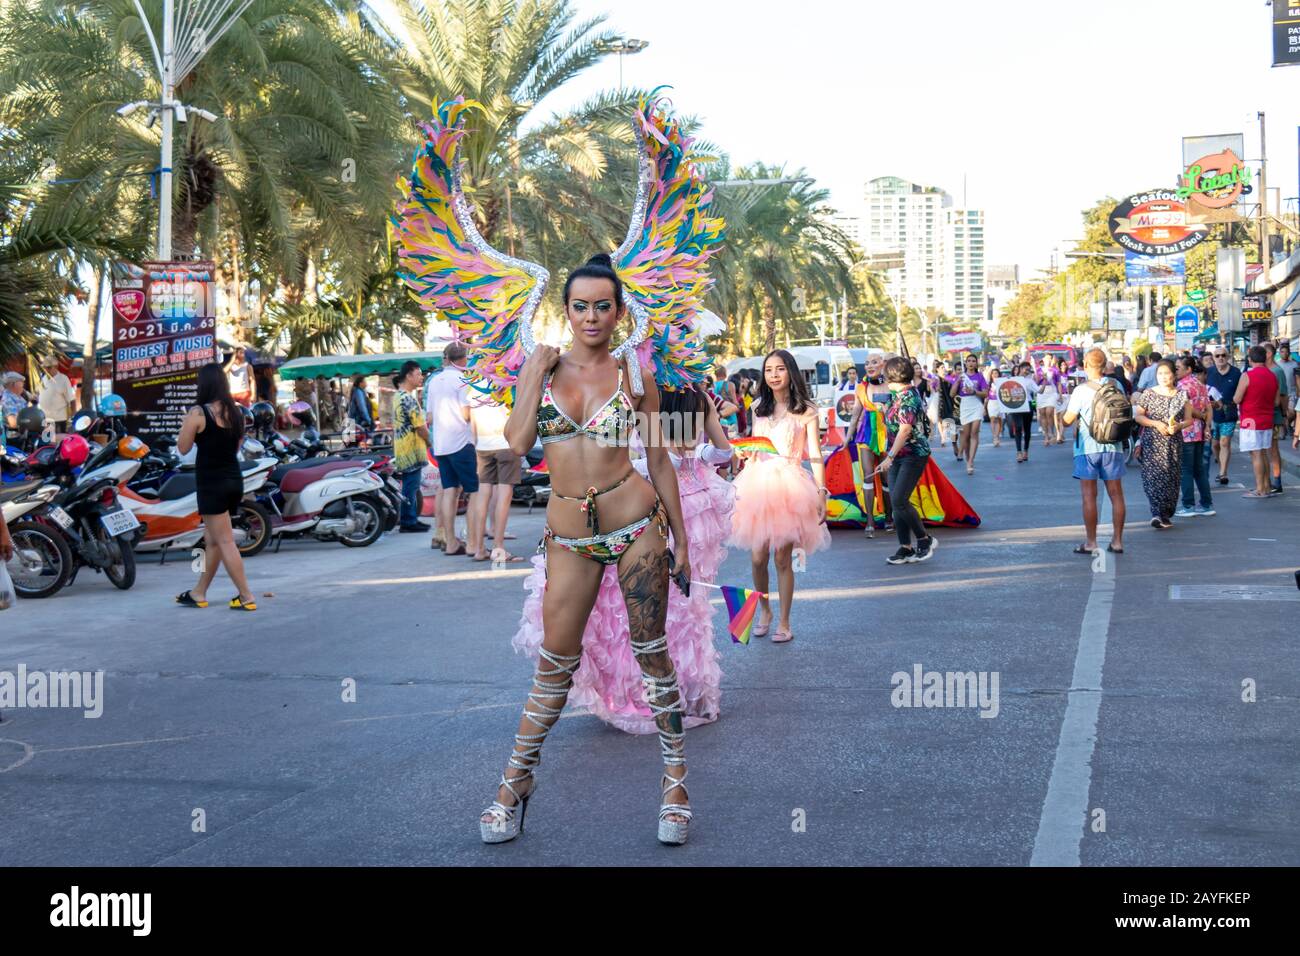 PATTAYA, THAILAND - FEBRUARY 15, 2020: a part of colorful LGBT parade with people wearing rainbow color take part in Pattaya International Pride 2020 Stock Photo